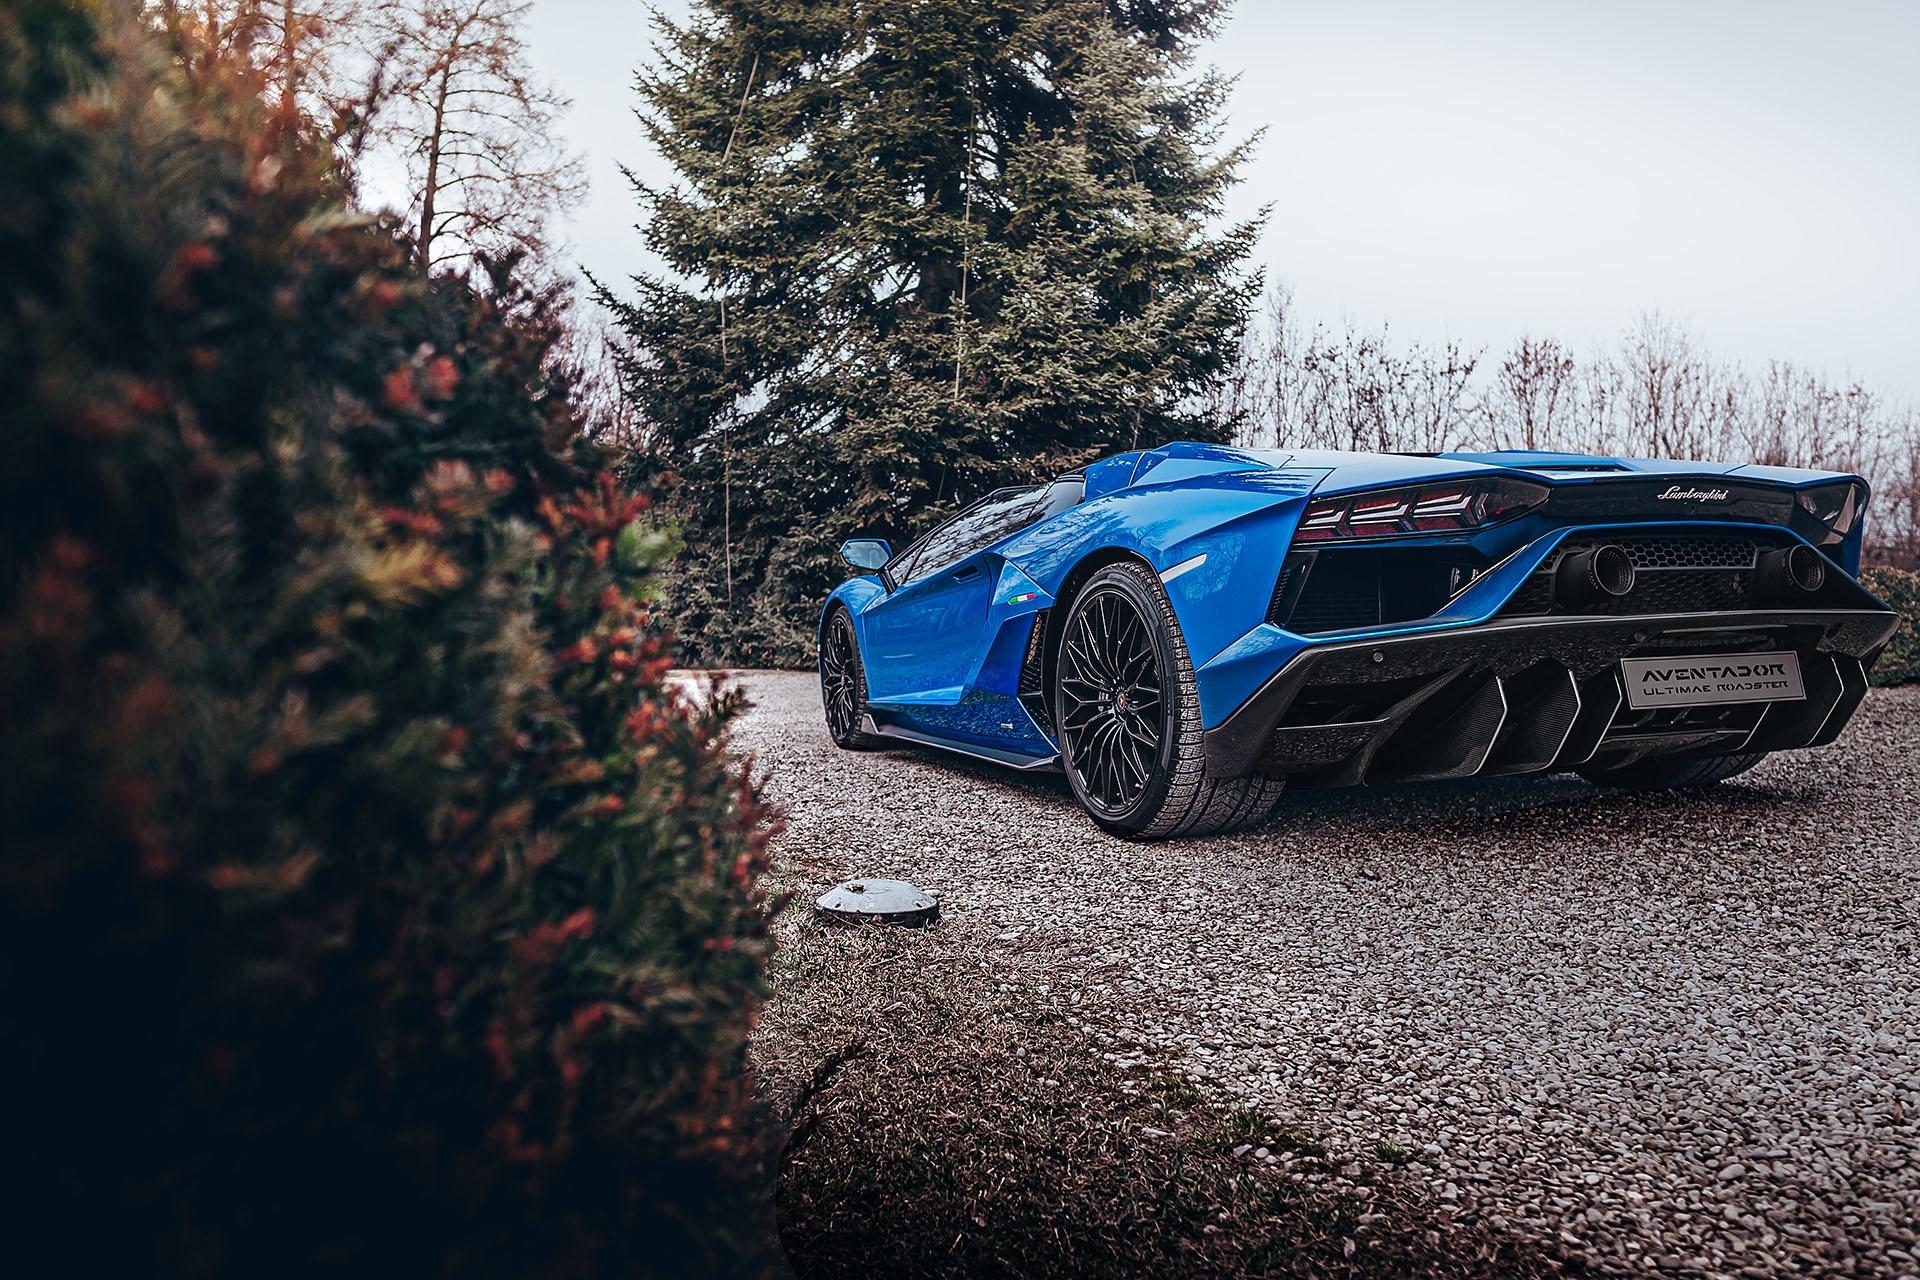 Aventador ultimae on the road 32